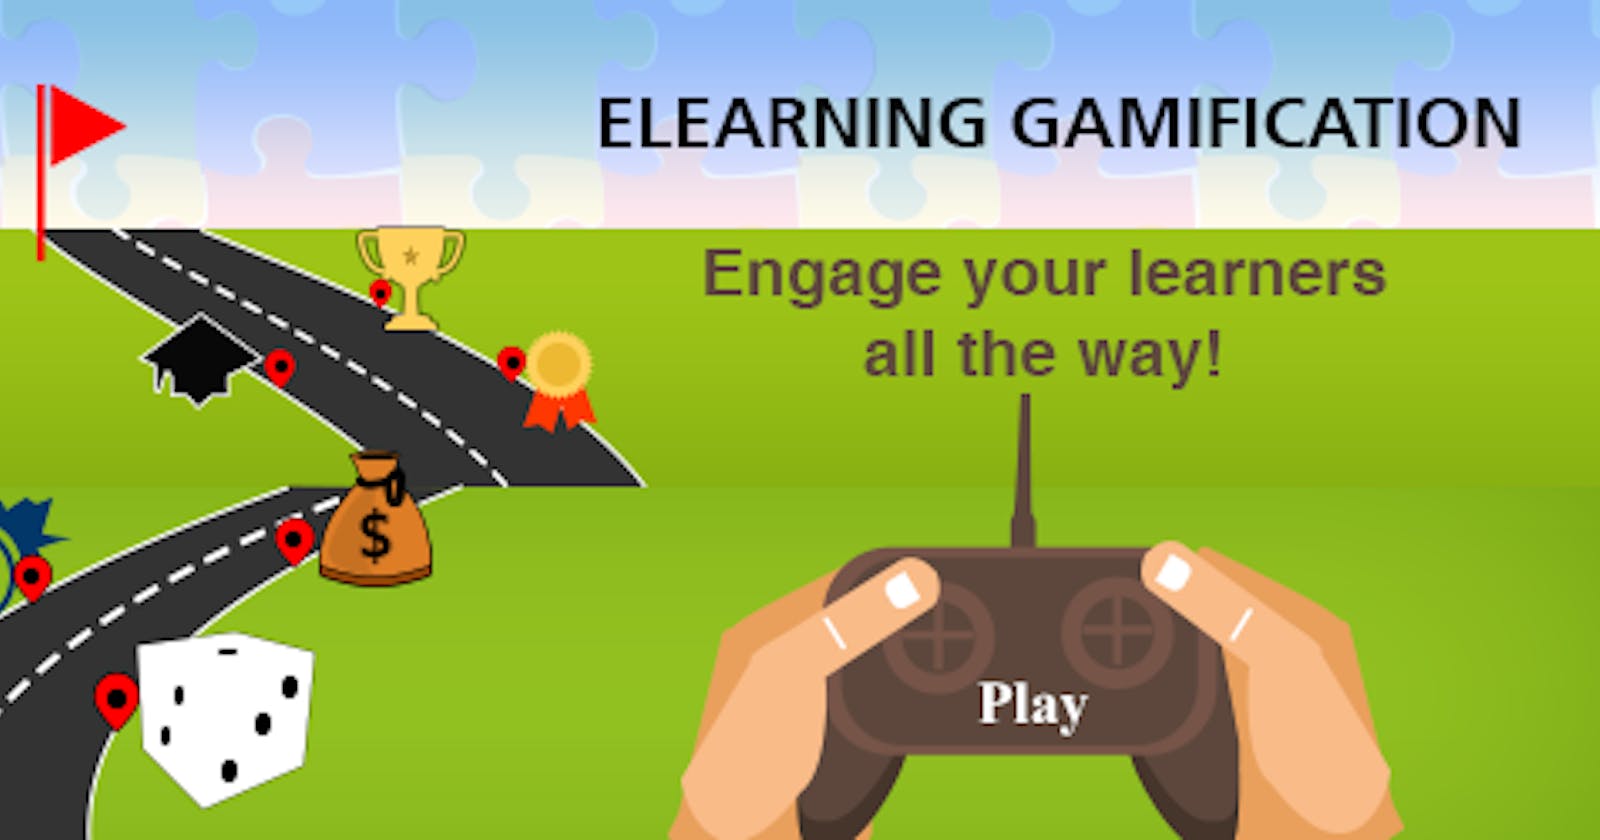 The Role of Rewards and Recognition in eLearning Gamification